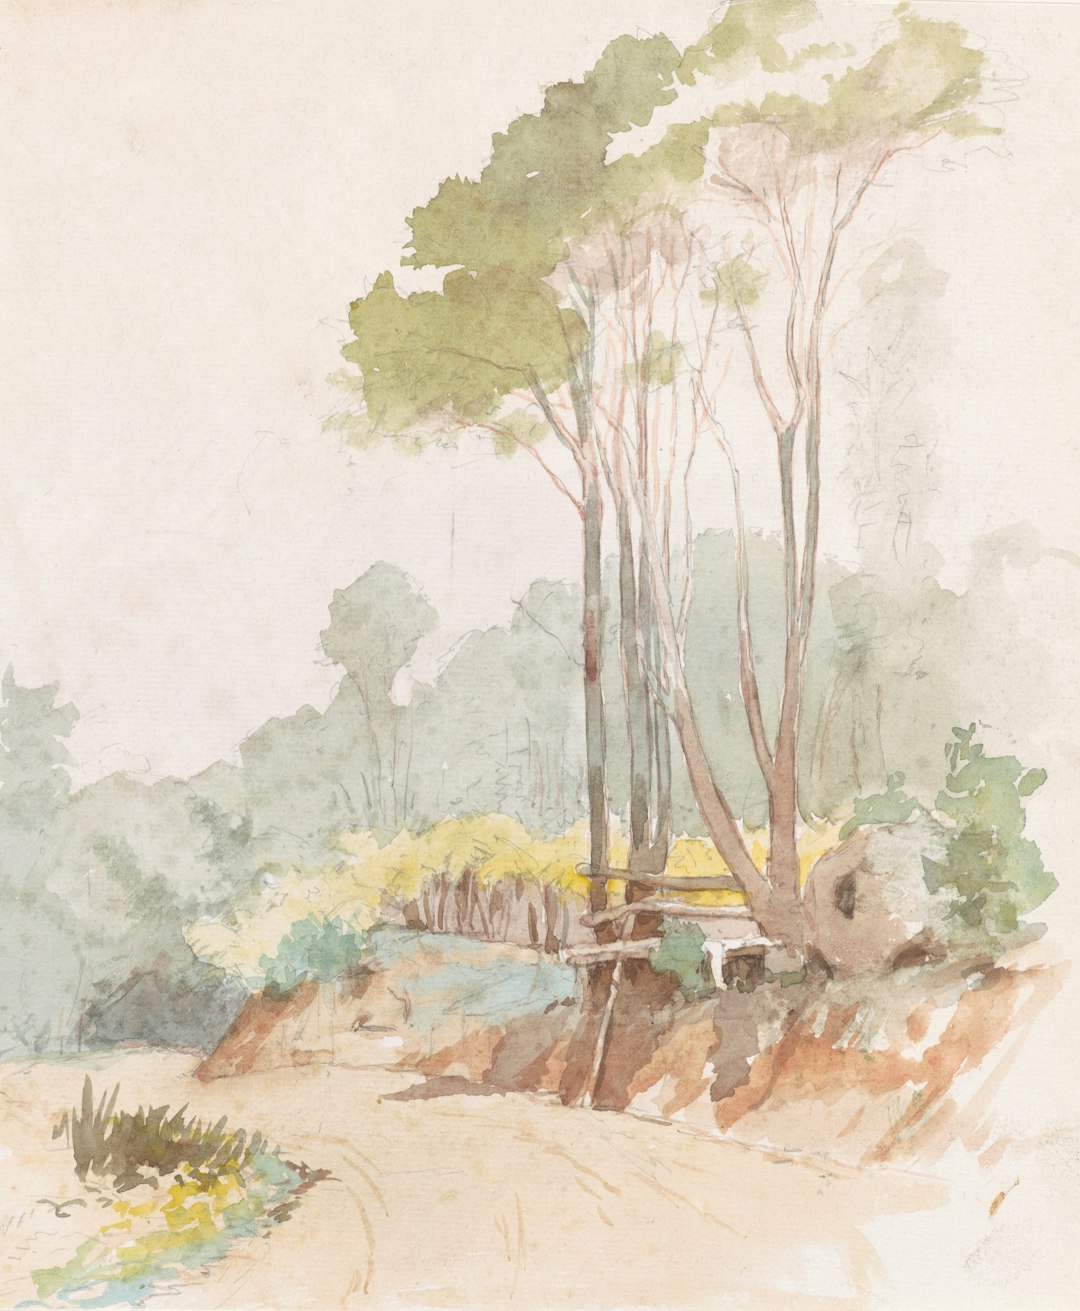 Untitled landscape, by Trevor Lloyd. Gift of the artist's daughter, Miss Constance Lloyd, 1980. Te Papa (1980-0078-1)